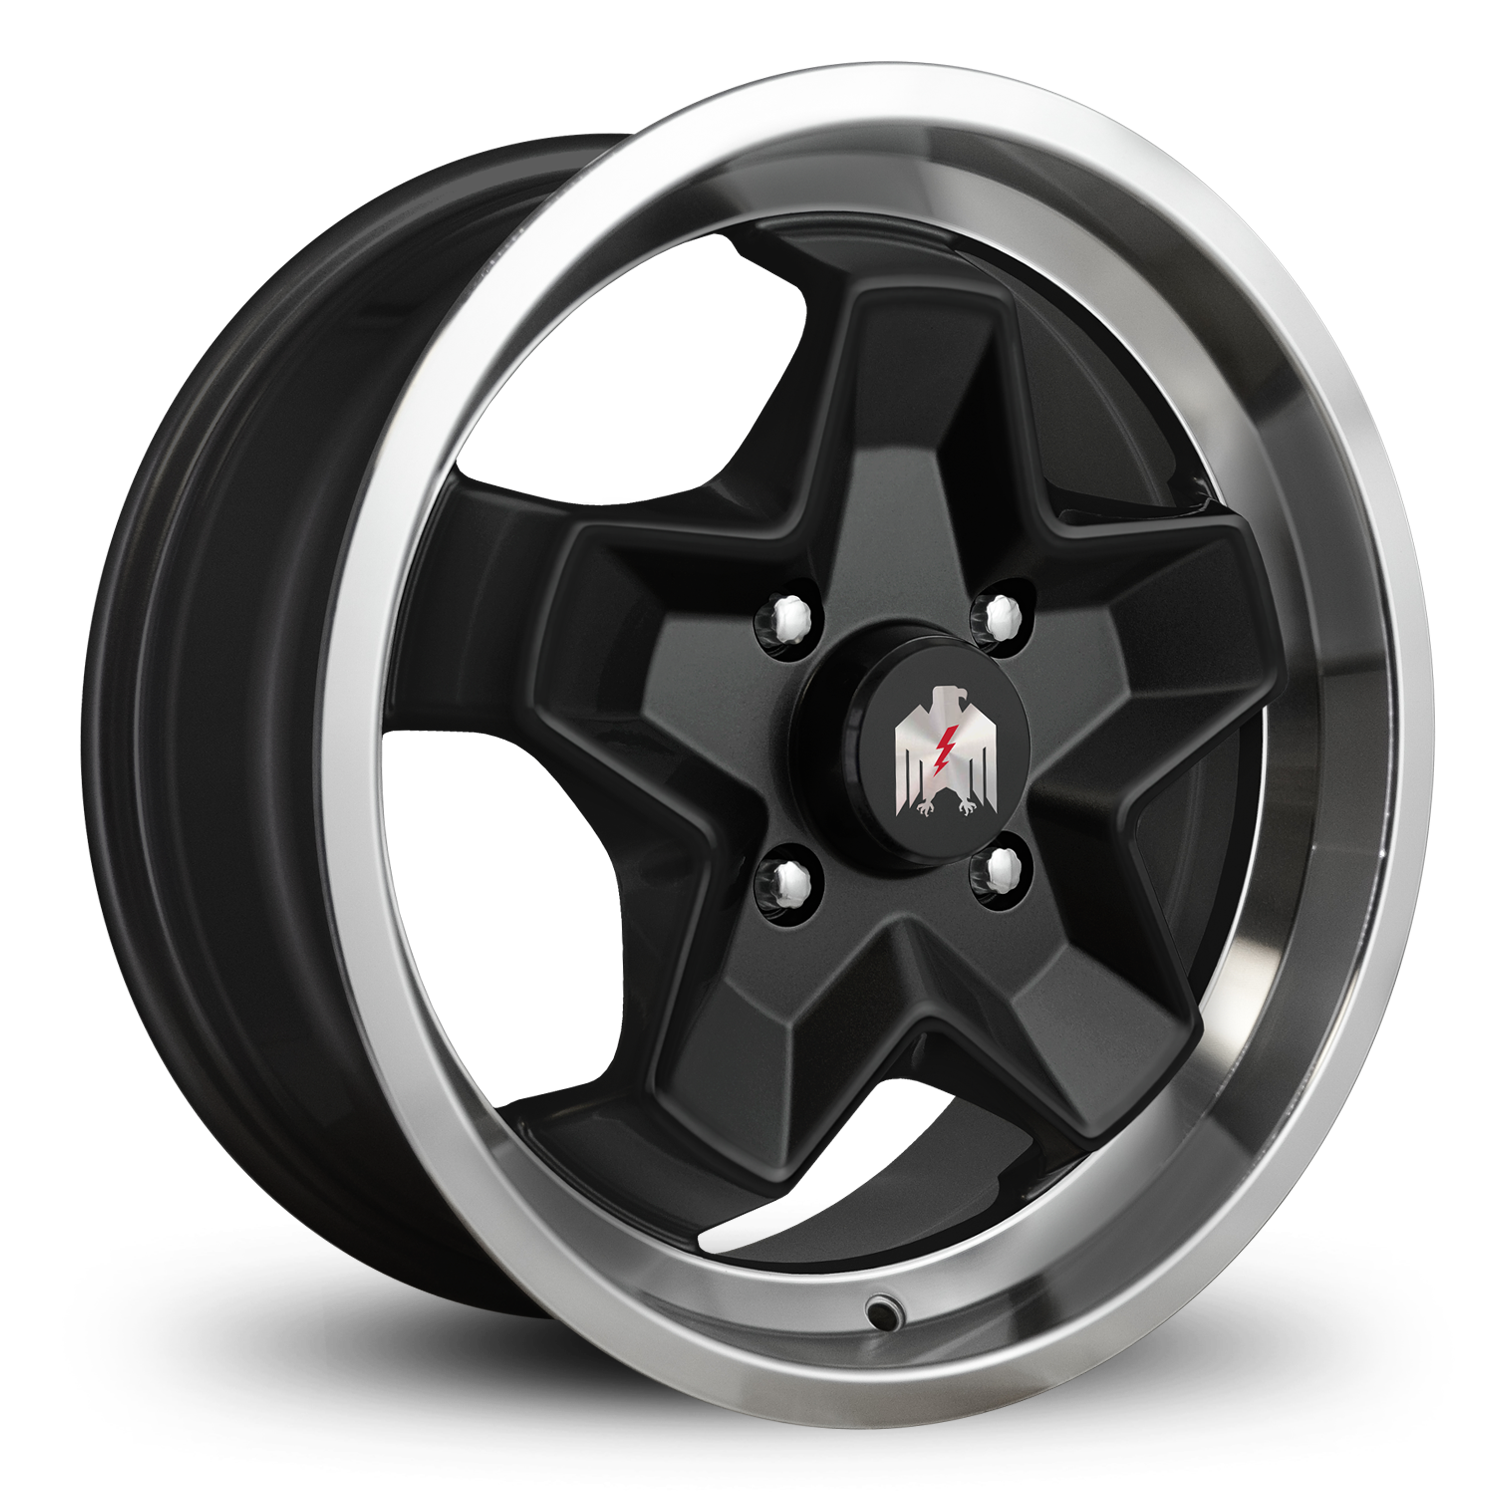 Shop the Klassik Rader Rally South African Rostyle Sprint Star Magnum 500 Replica style Wheels